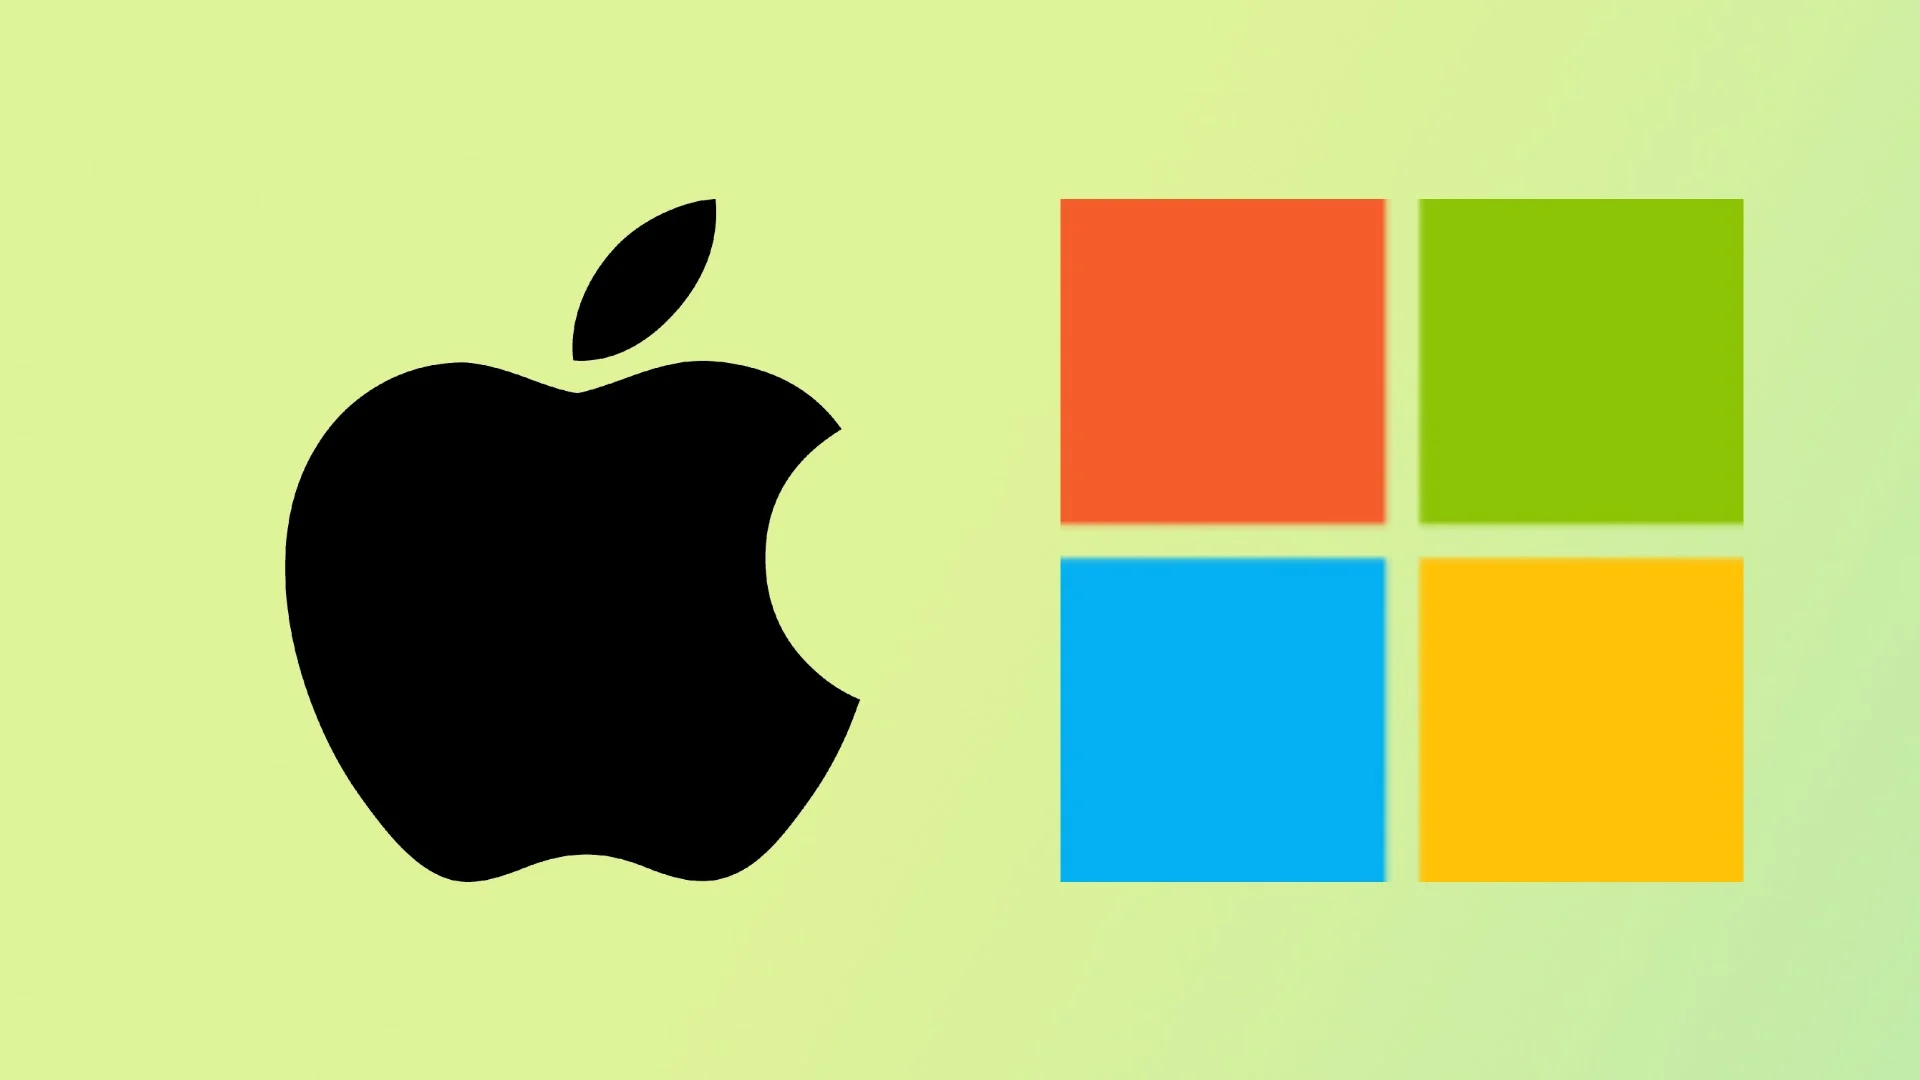 Microsoft Surpasses Apple: A Shift in Global Valuation Dominance Fueled by GenAI Growth